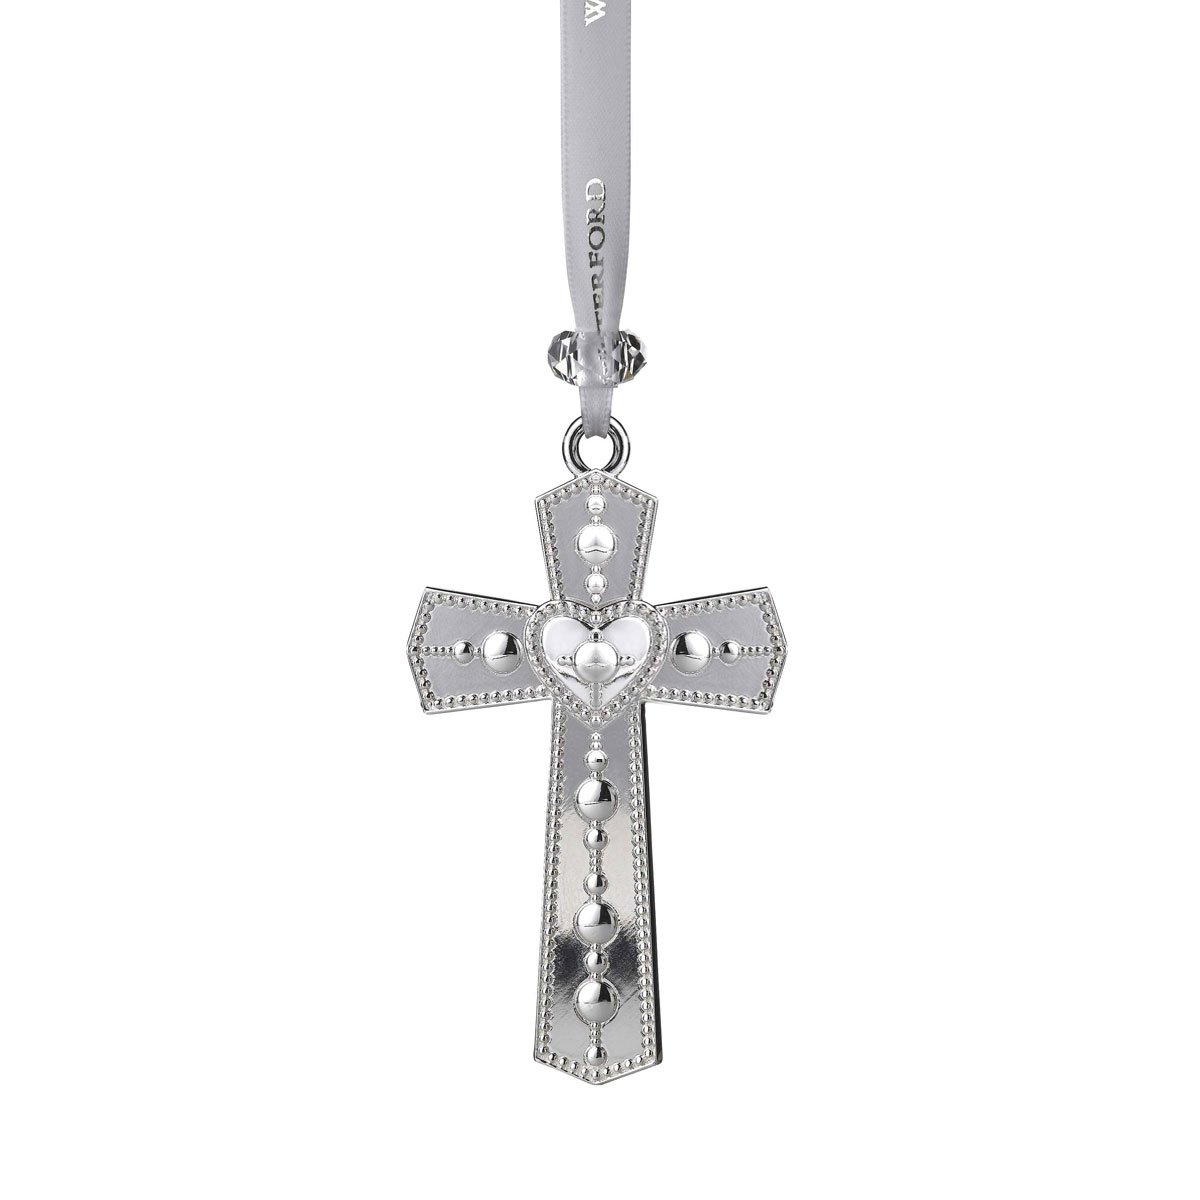 Waterford Silver Cross Ornament